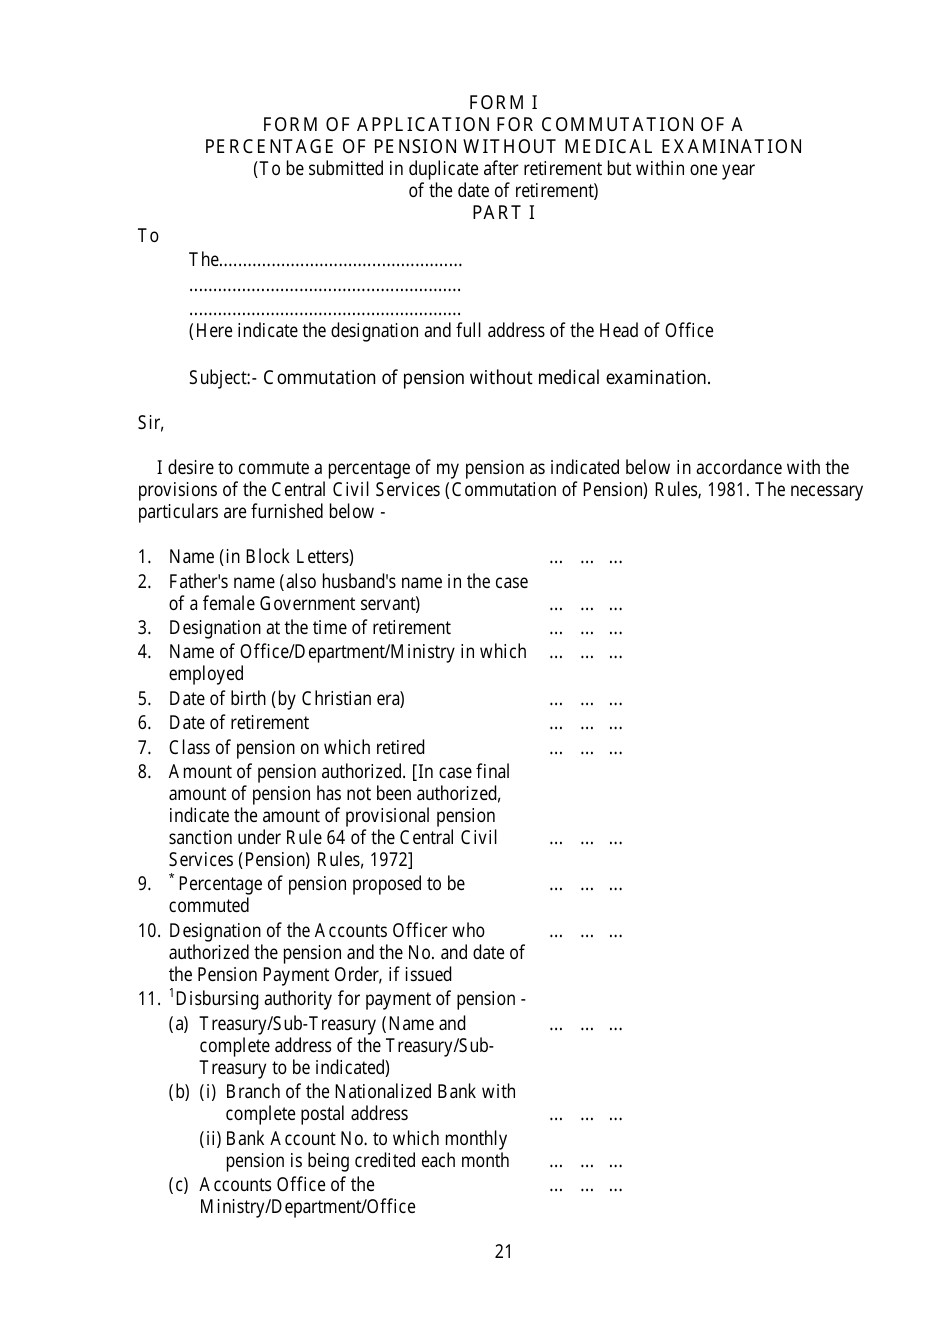 Form I Form of Application for Commutation of a Percentage of Pension Without Medical Examination - India, Page 1